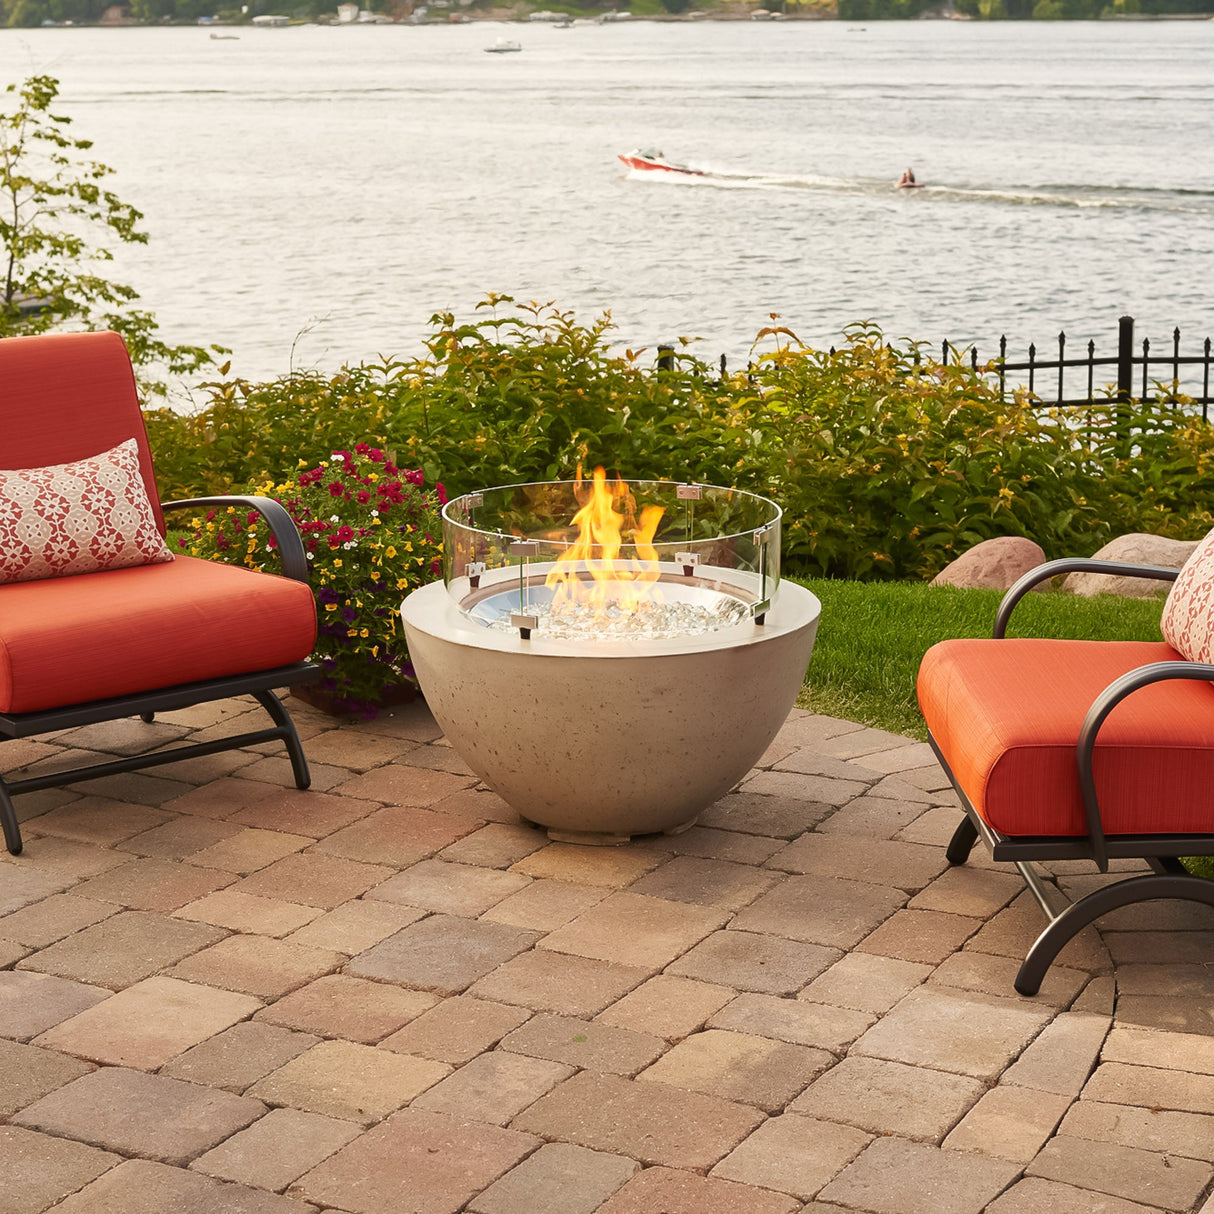 A Cove Round Gas Fire Pit Bowl 29" next to a lake on a scenic patio setup with outdoor furniture